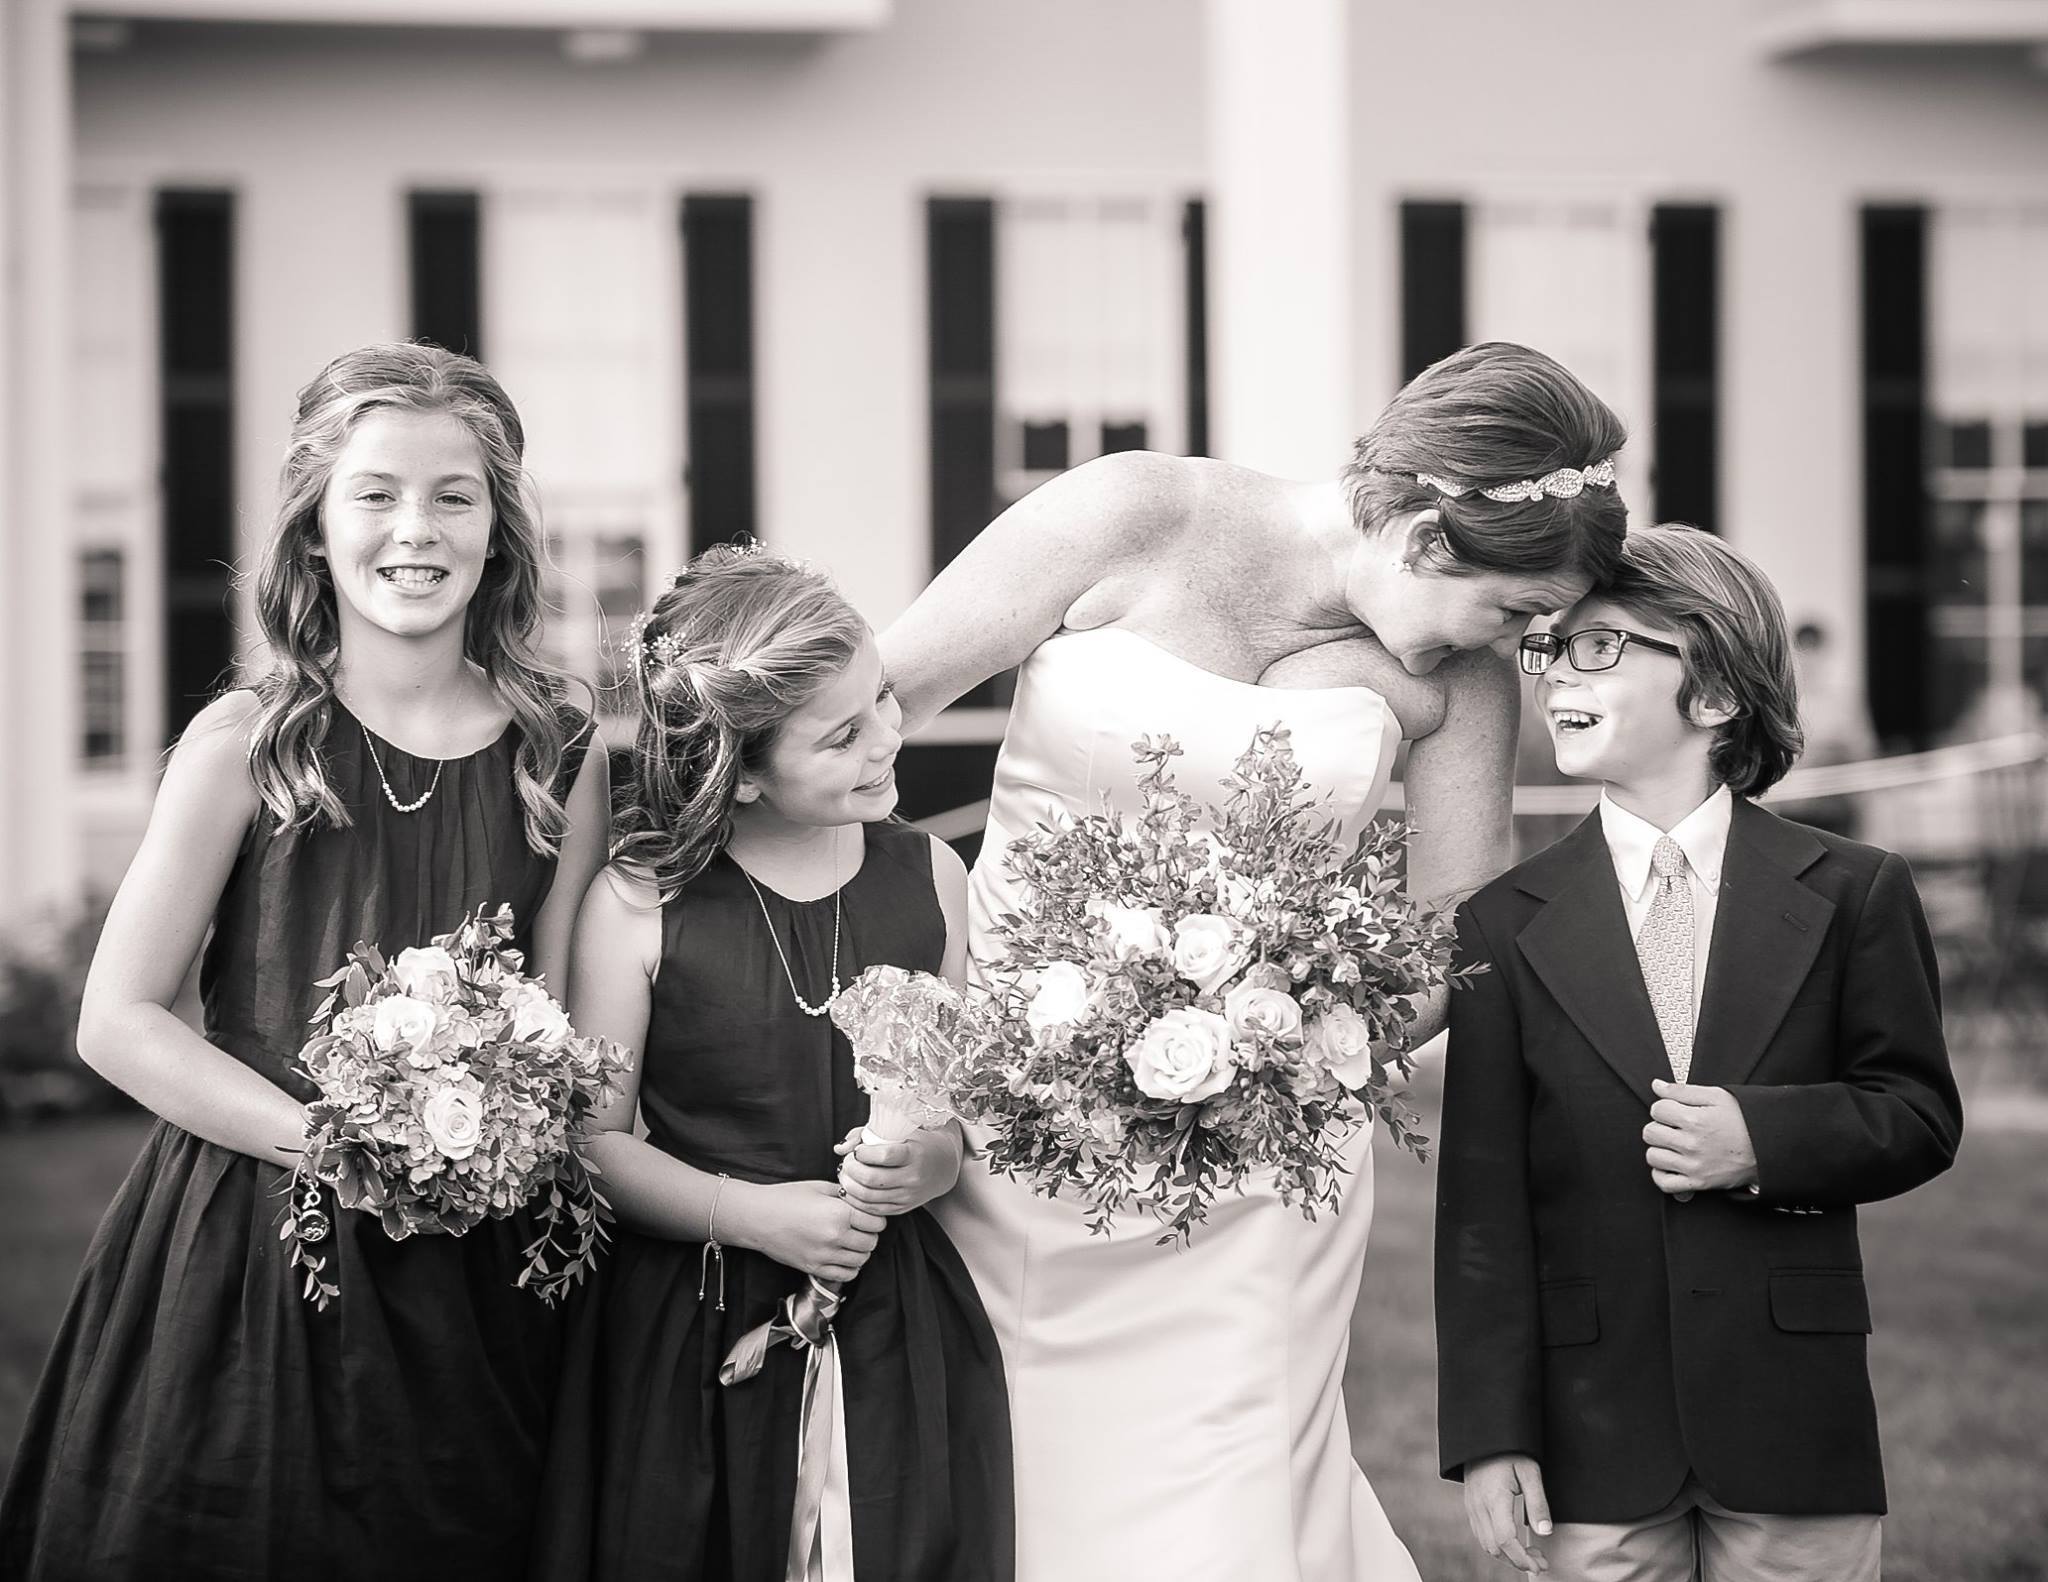 Local photographer | Michelle Coombs Photography